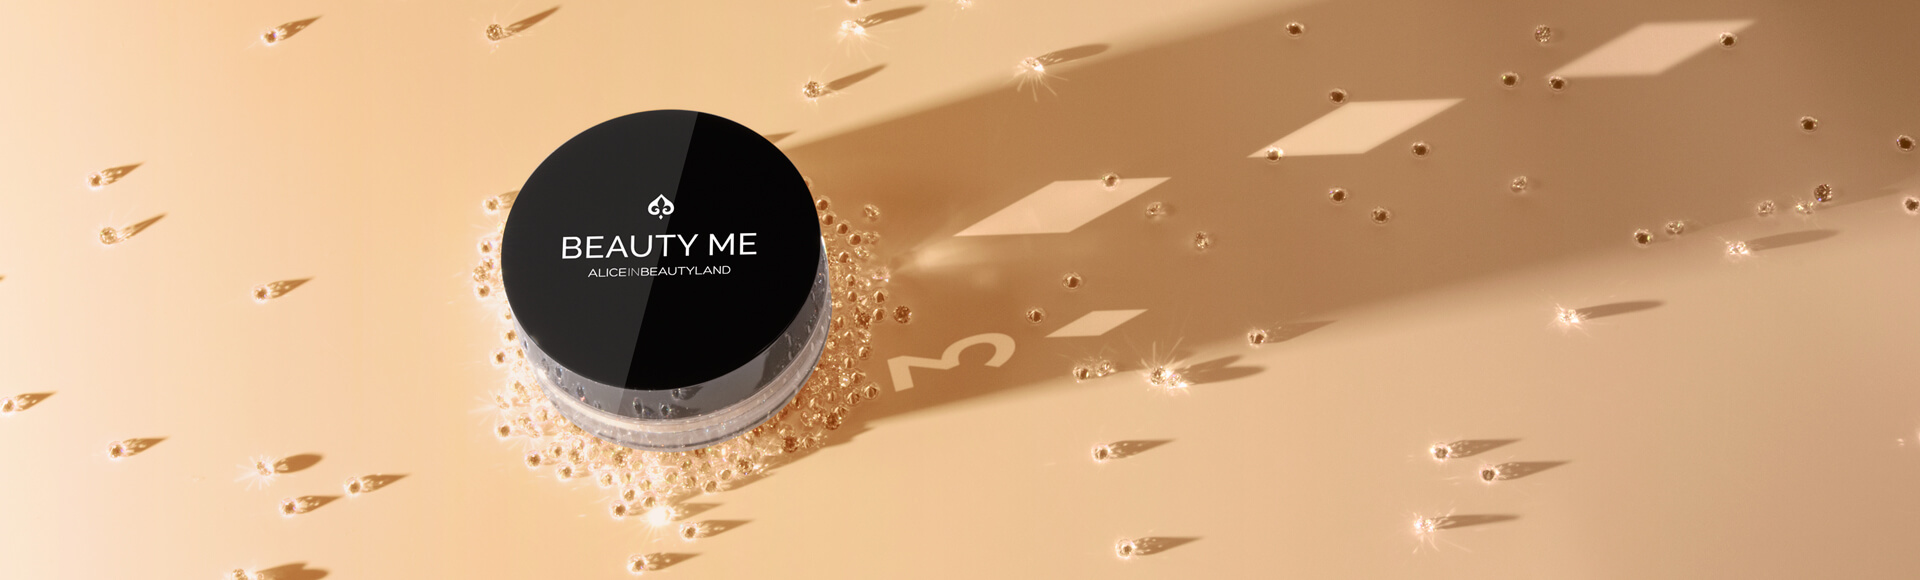 Beauty me makeup mineral foundation with a poker card shadow and diamonds